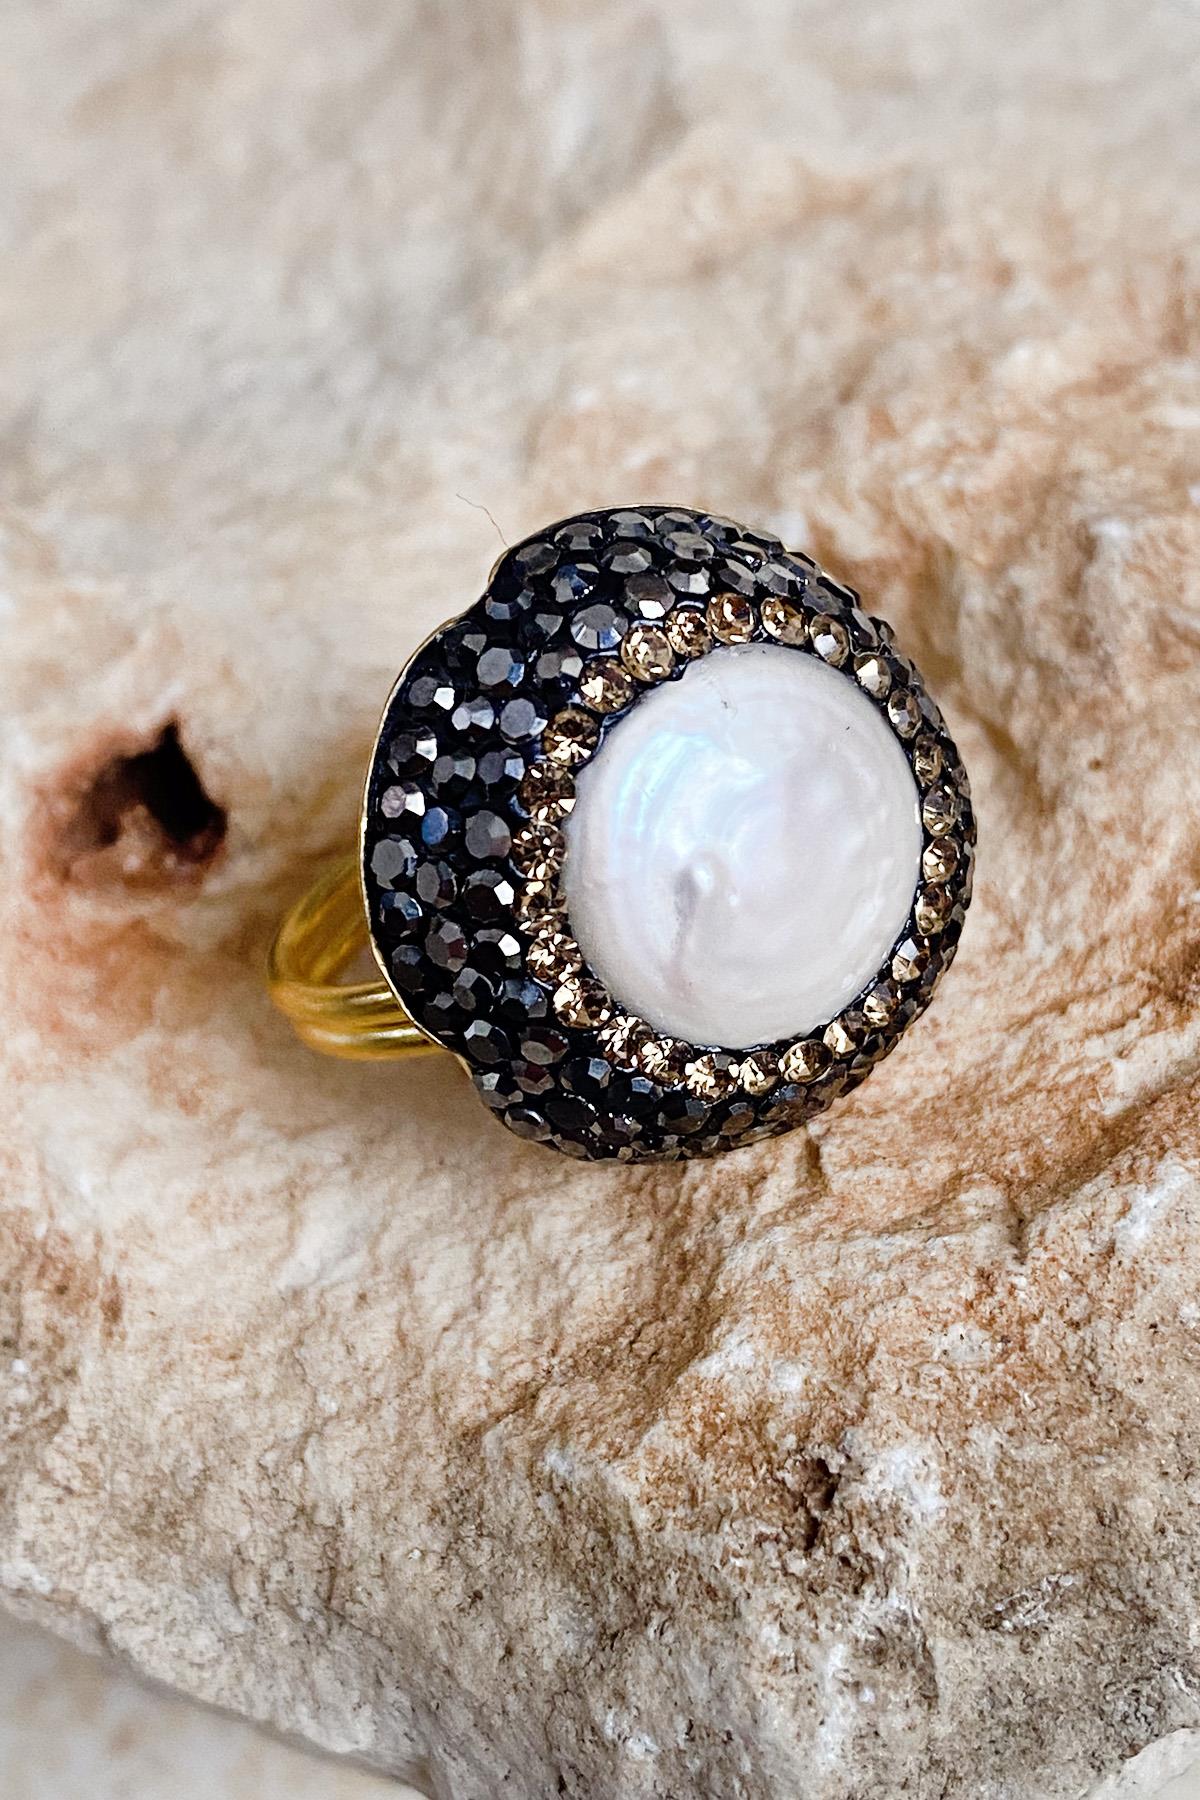 Akasya Series White Pearl Natural Stone Handcrafted Women's  Ring Adjustable Size